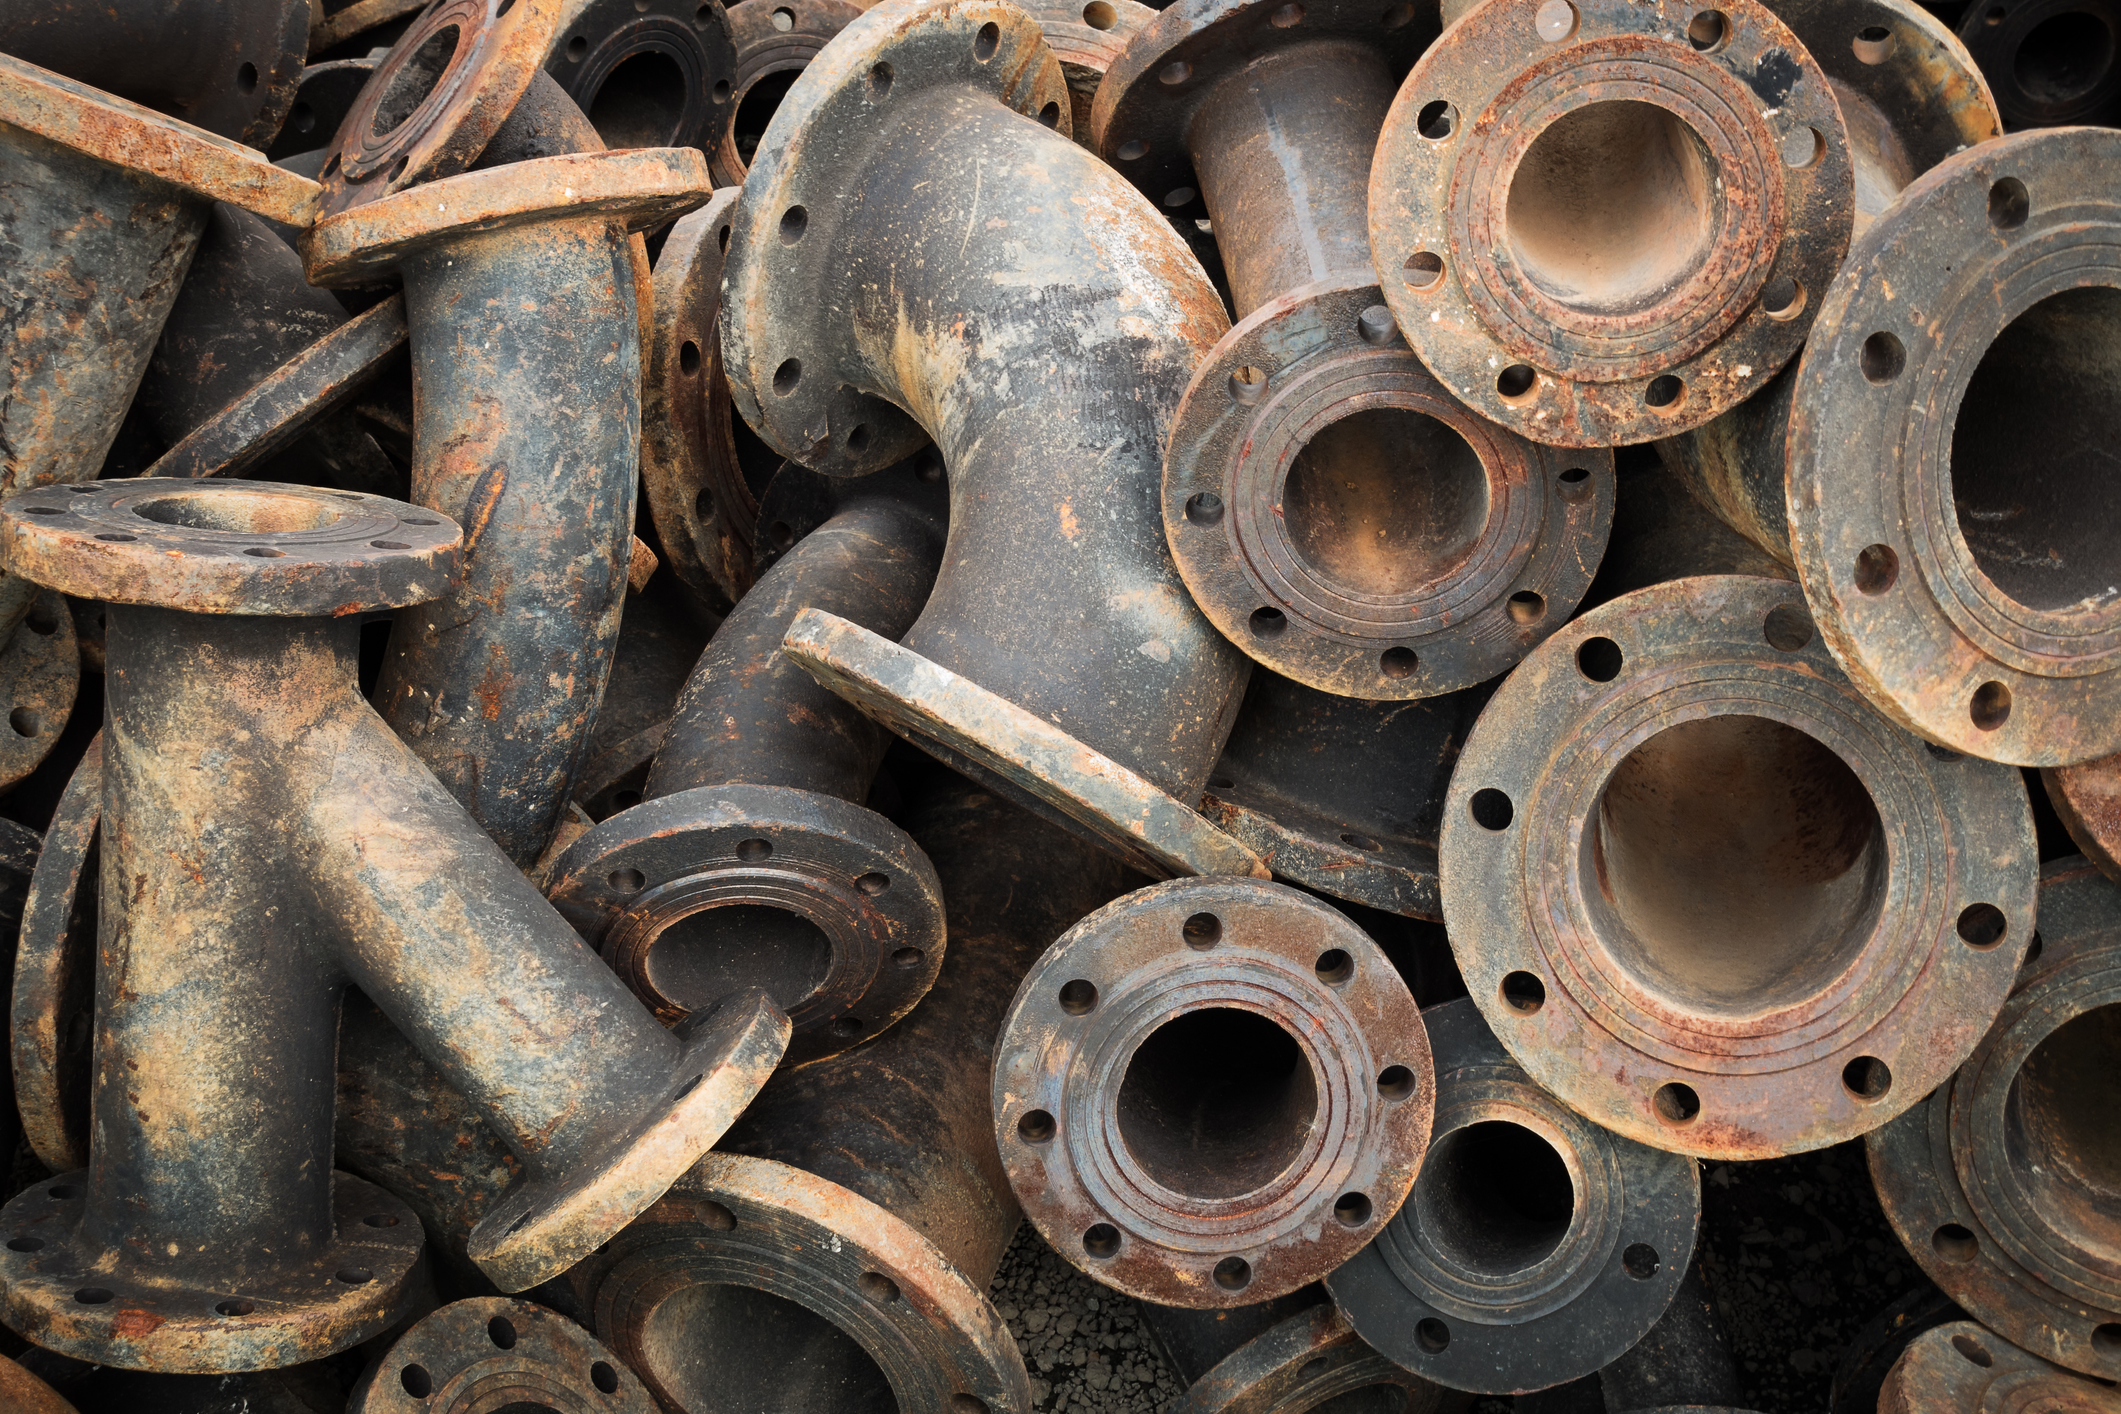 Pile of cast iron sewage pipe fittings